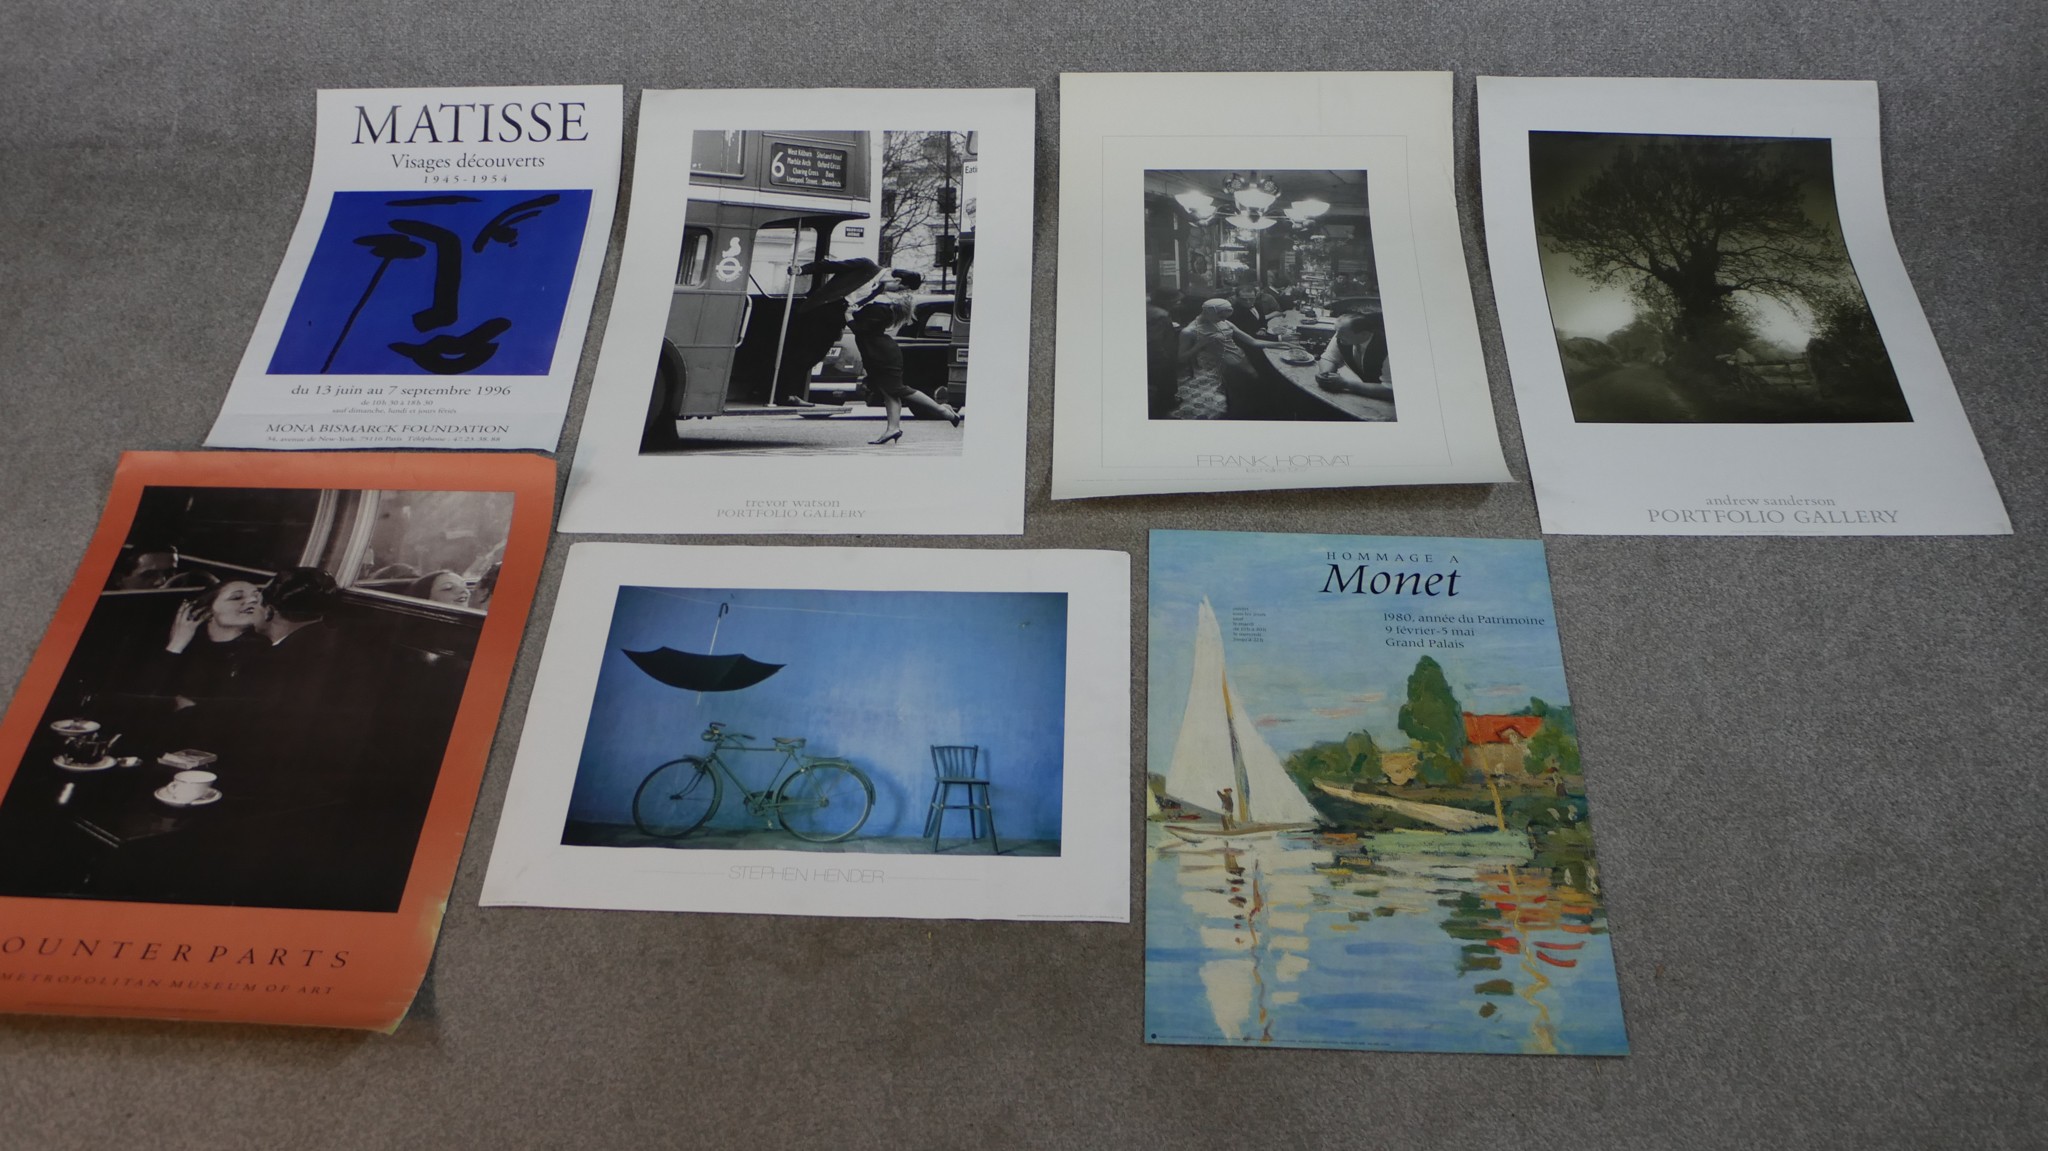 Seven vintage large colour exhibition posters, including Matisse, Monet and Counterparts at the